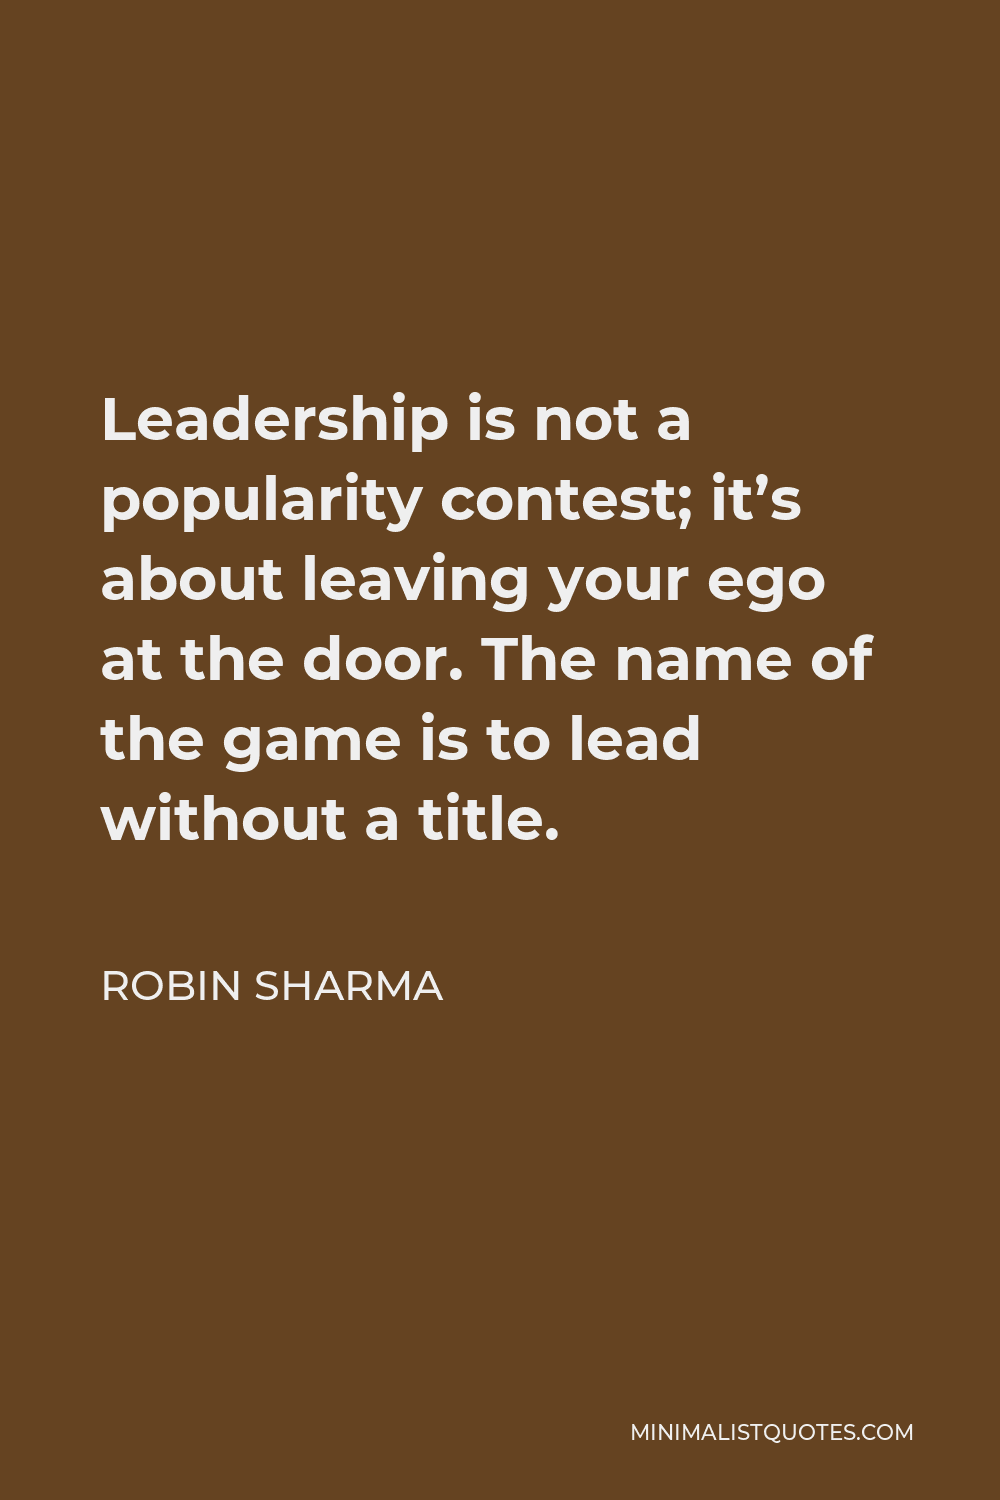 Robin Sharma Quote - Leadership is not a popularity contest; it’s about leaving your ego at the door. The name of the game is to lead without a title.